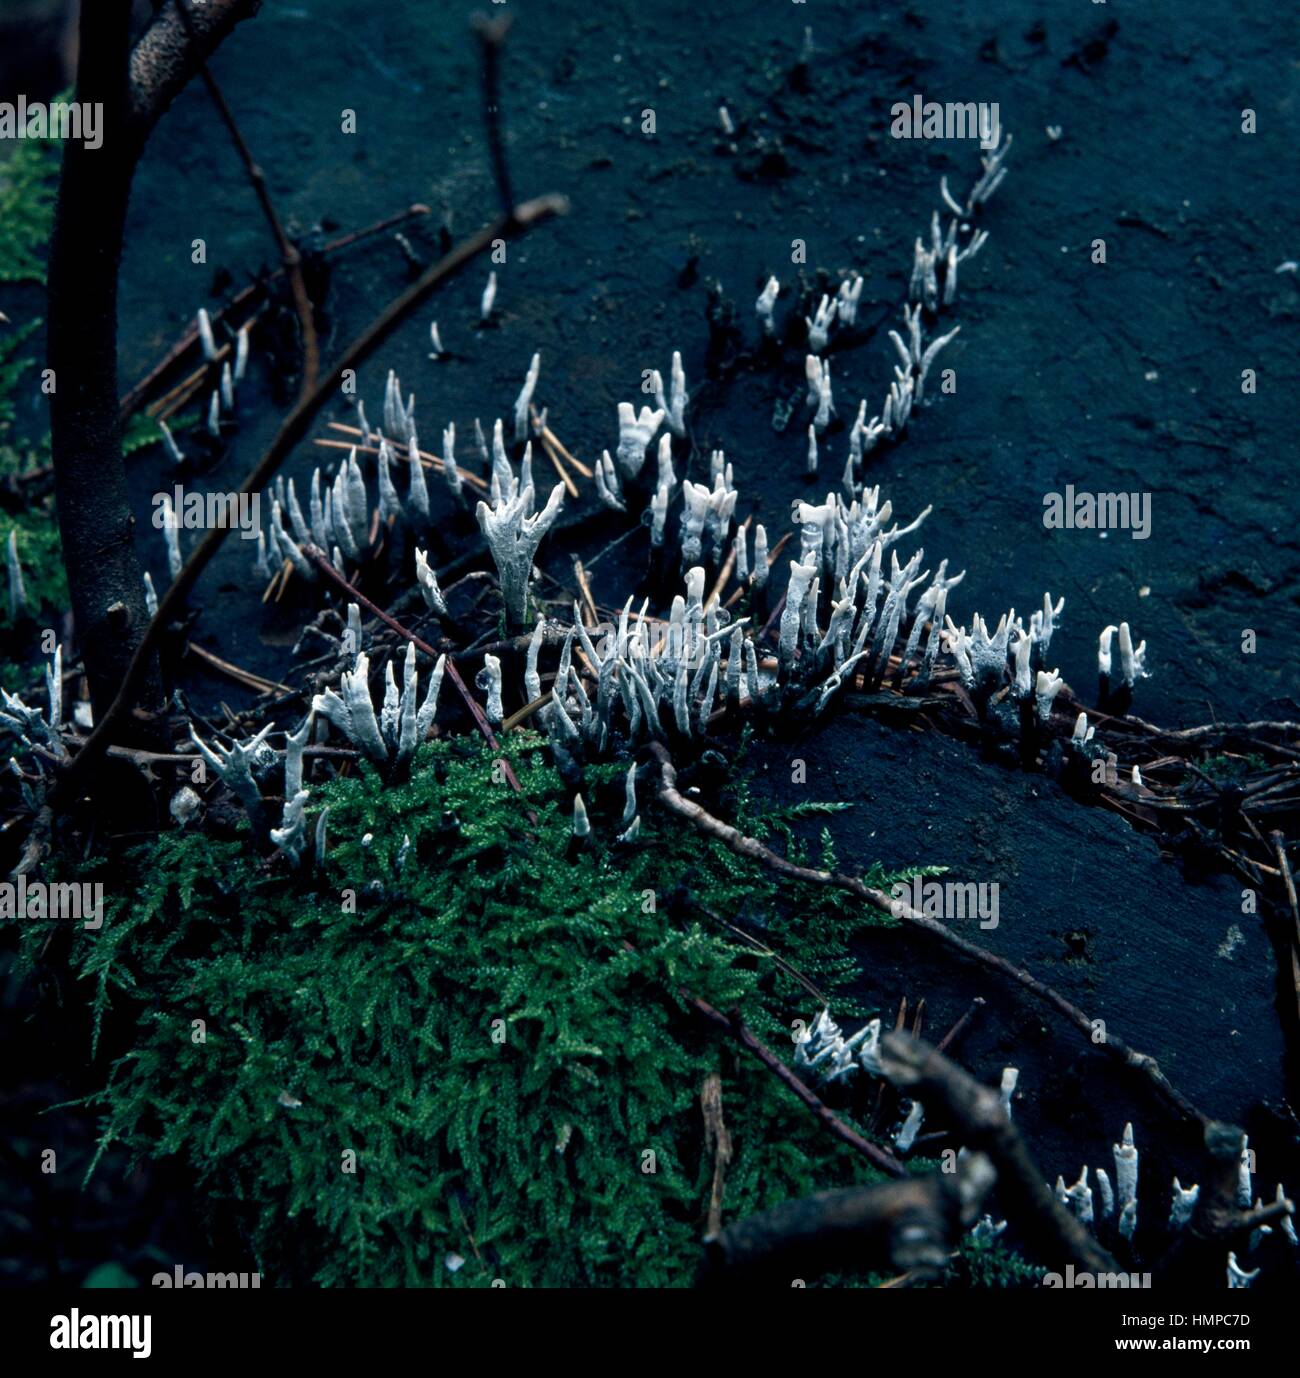 Example of Candlestick fungus, Candlesnuff fungus, Carbon antlers or Stag's horn fungus (Xylaria Hypoxylon), Xylariaceae. Stock Photo